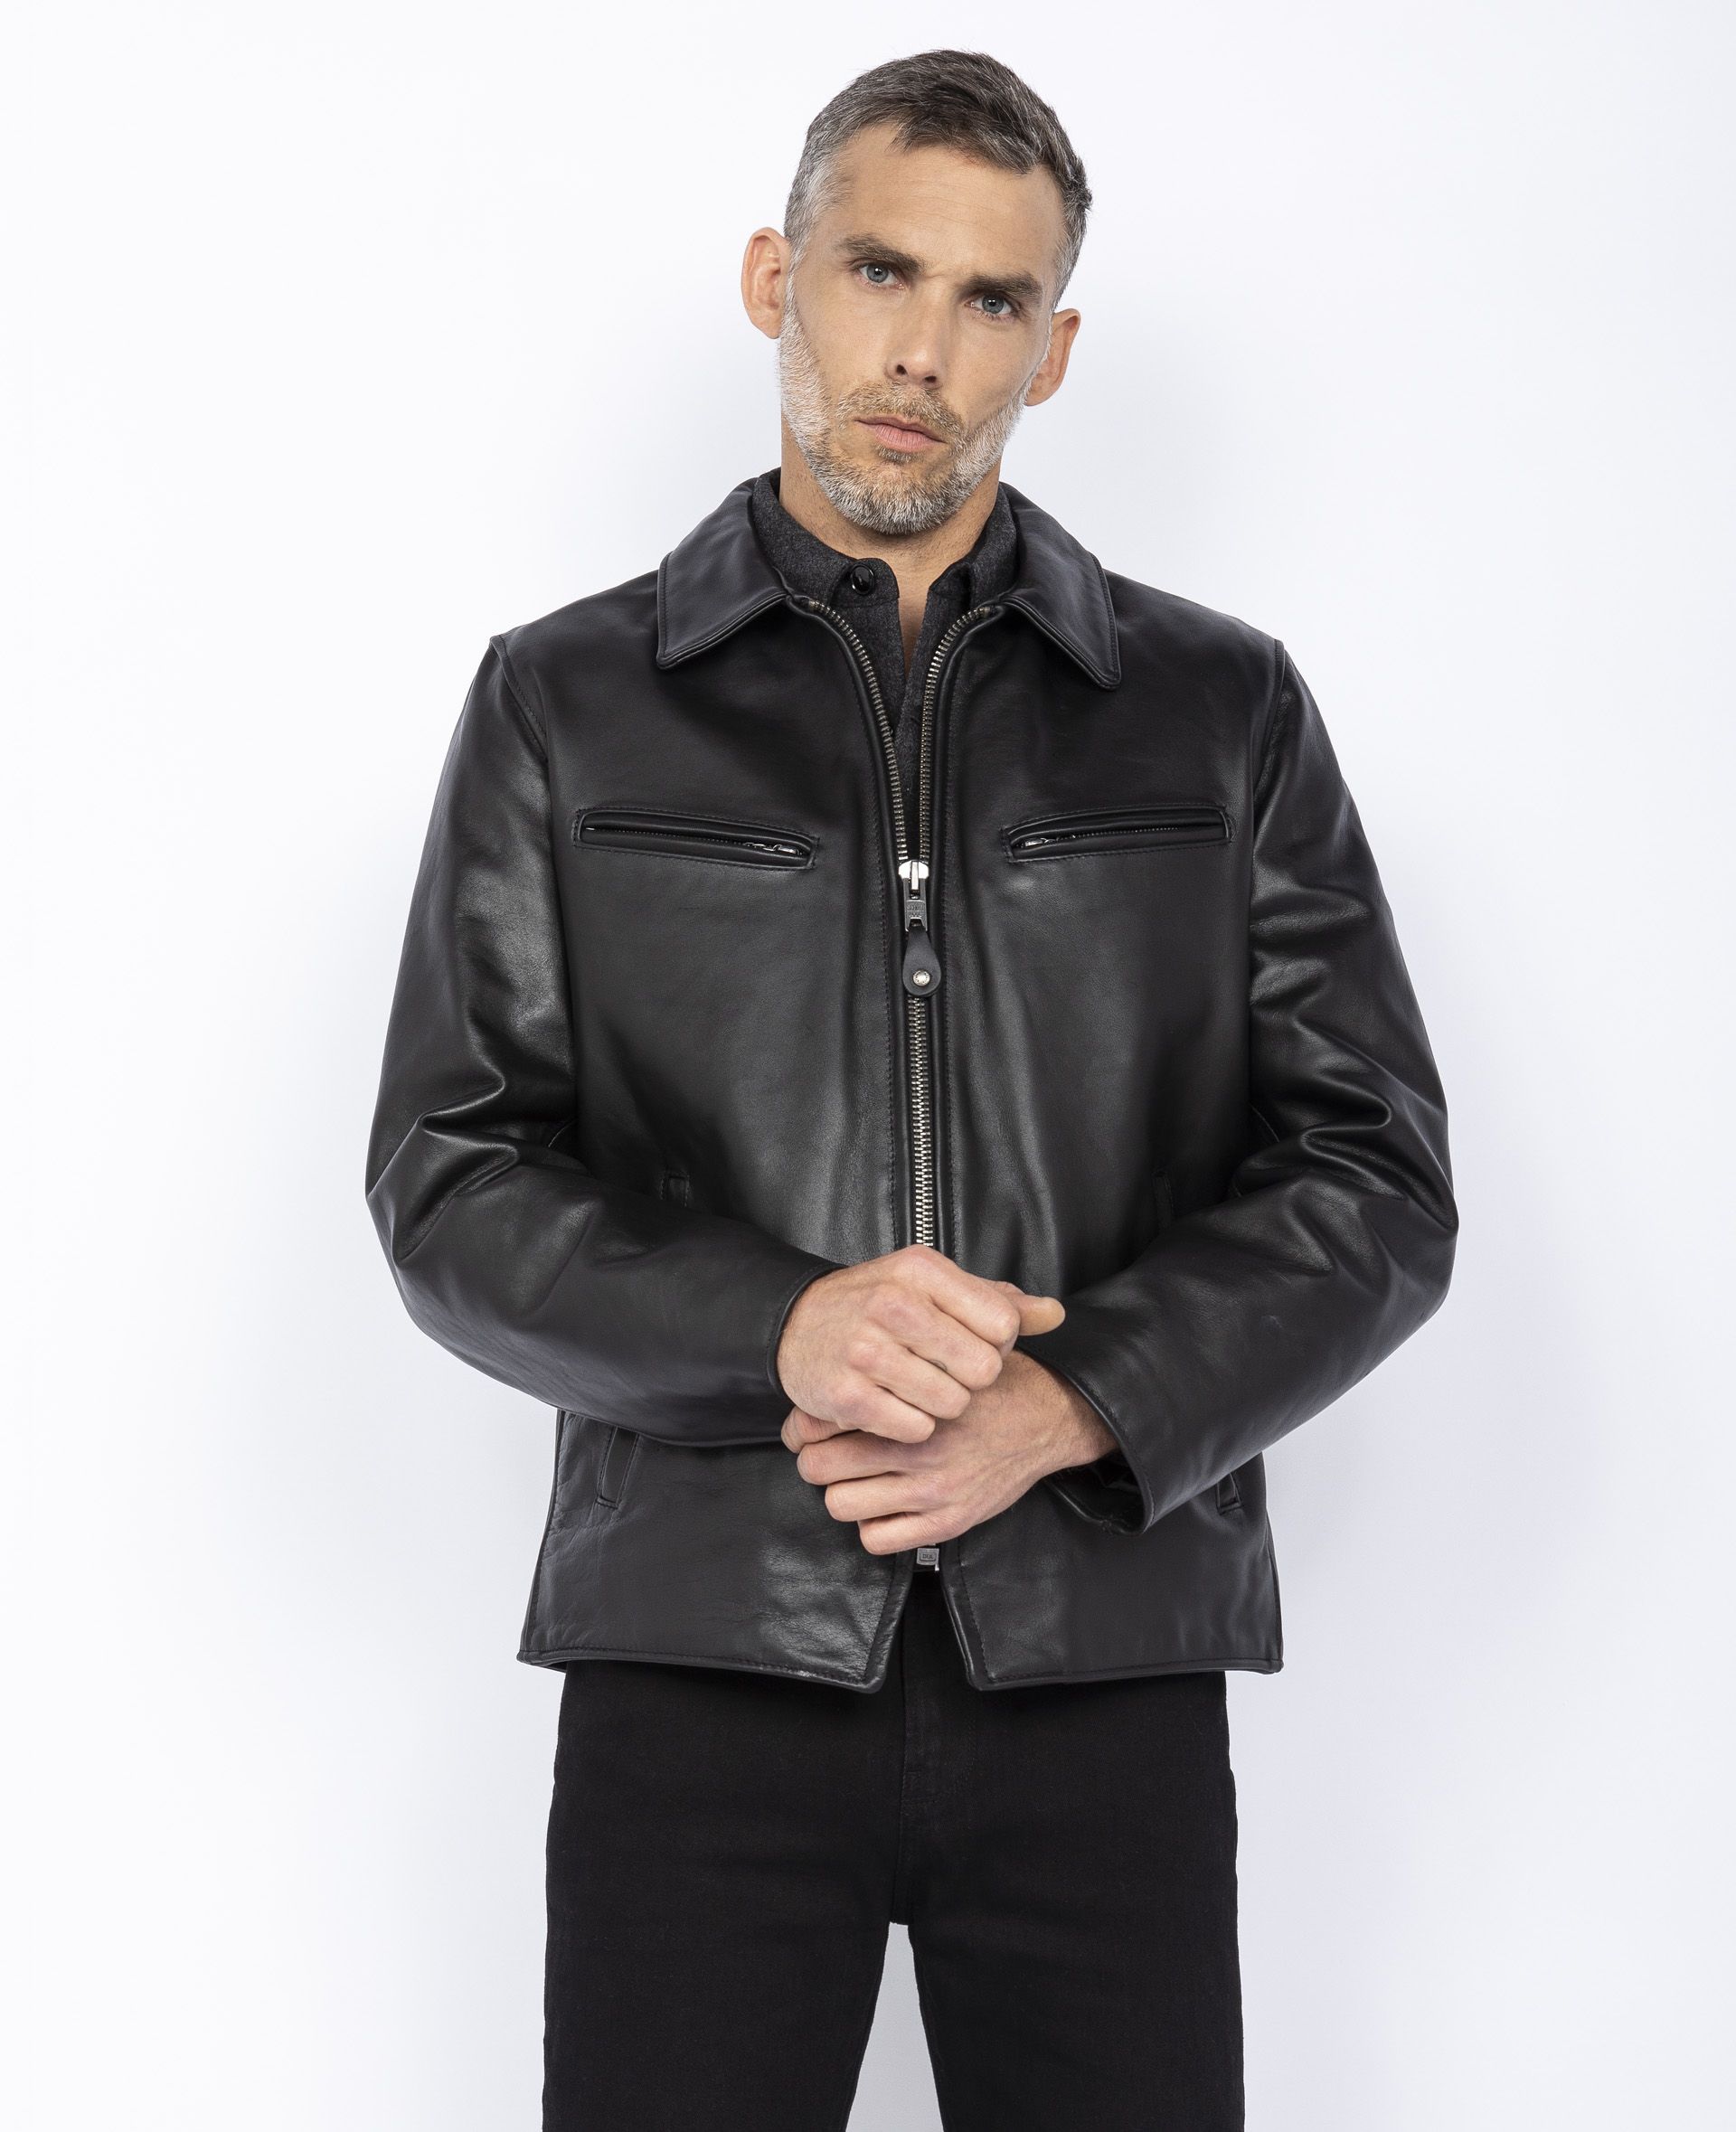 Buy Biker jacket mythical USA, cowhide leather man 100% cowhide leather